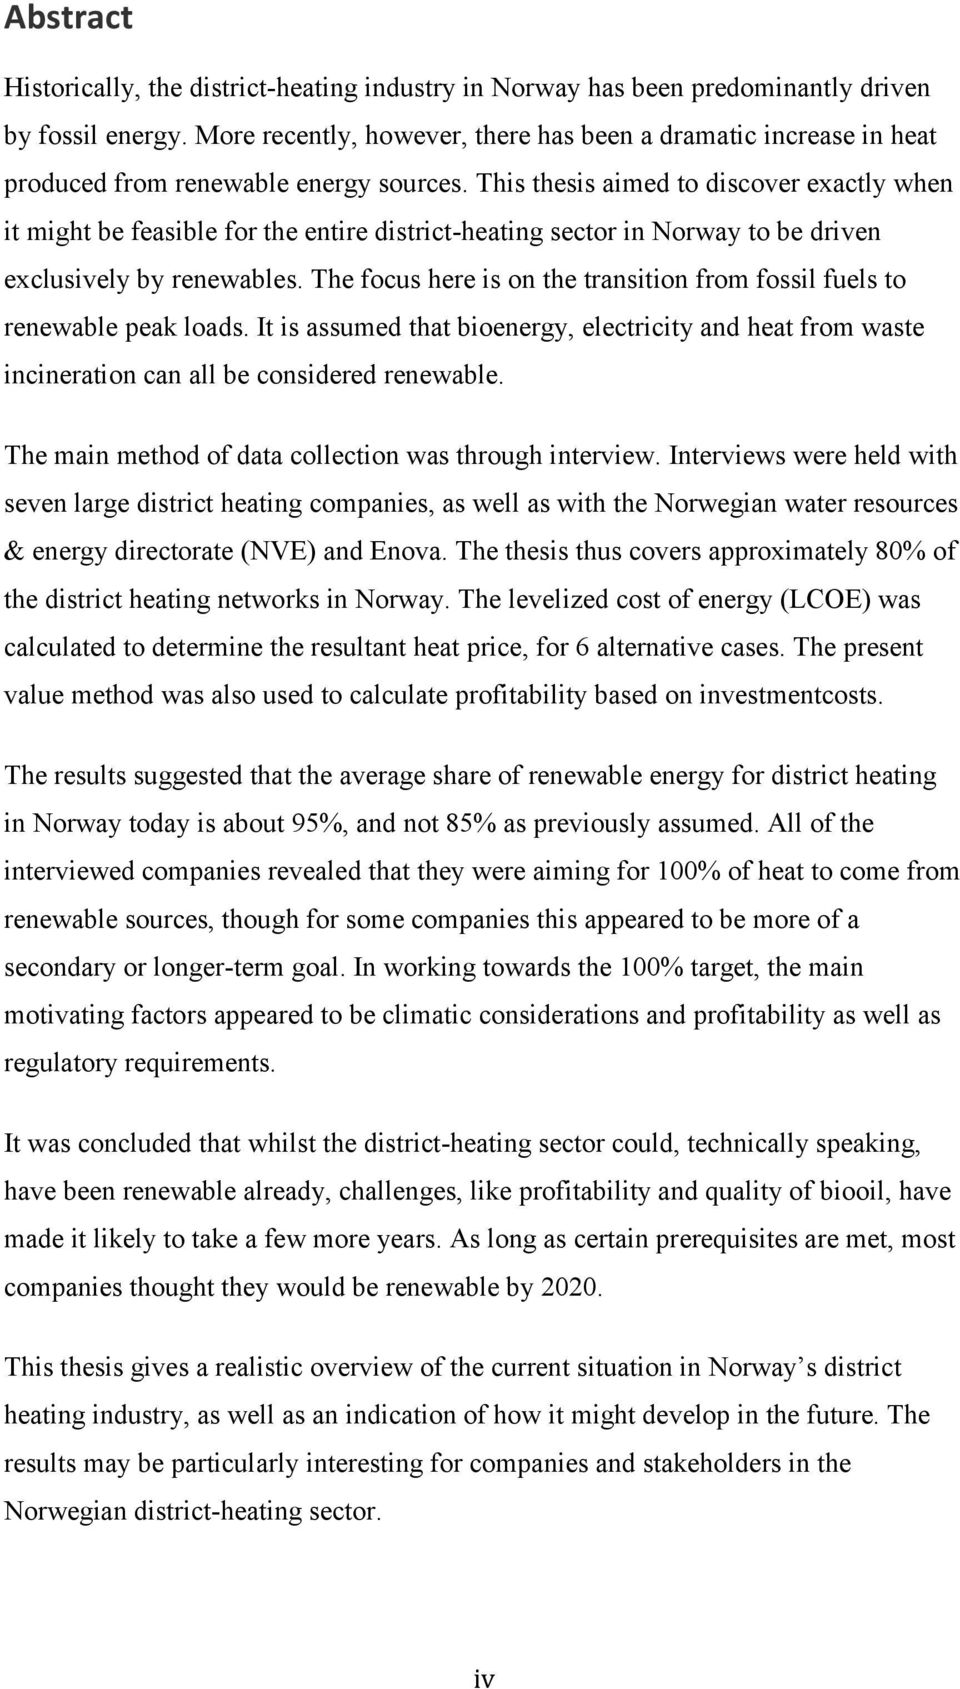 This thesis aimed to discover exactly when it might be feasible for the entire district-heating sector in Norway to be driven exclusively by renewables.